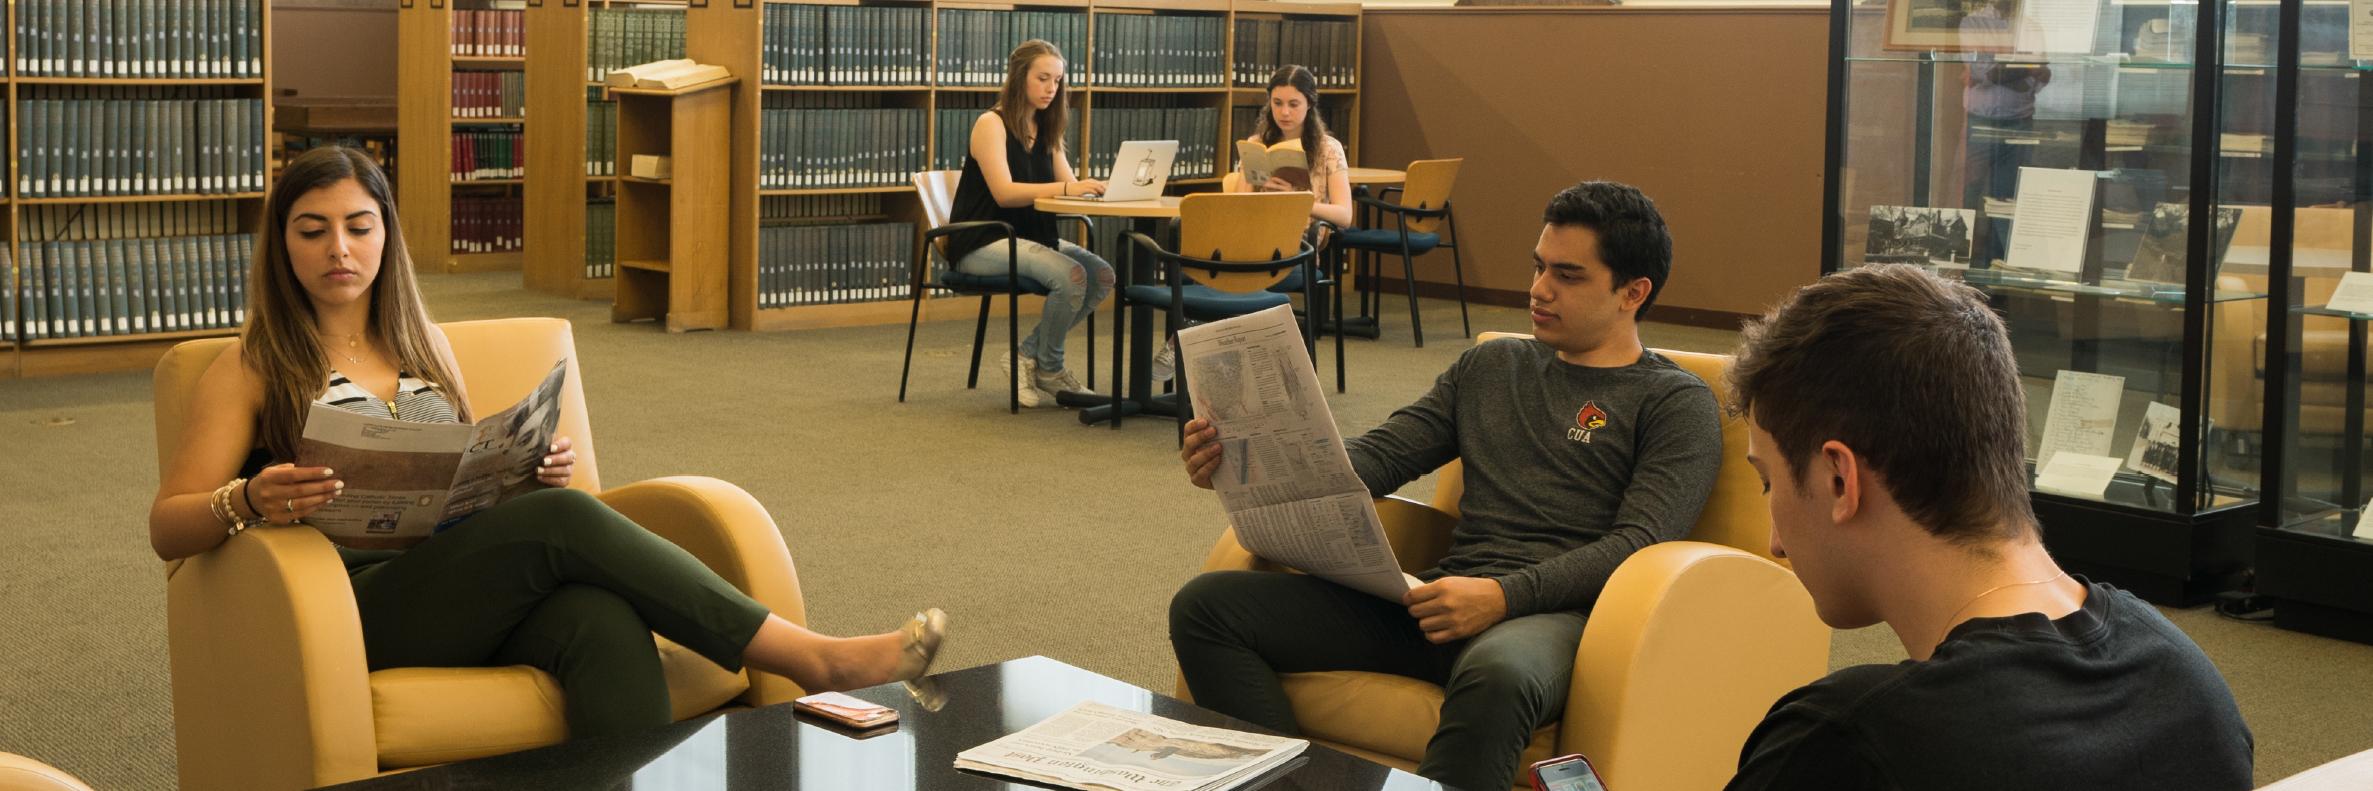 Students in Mullen Library